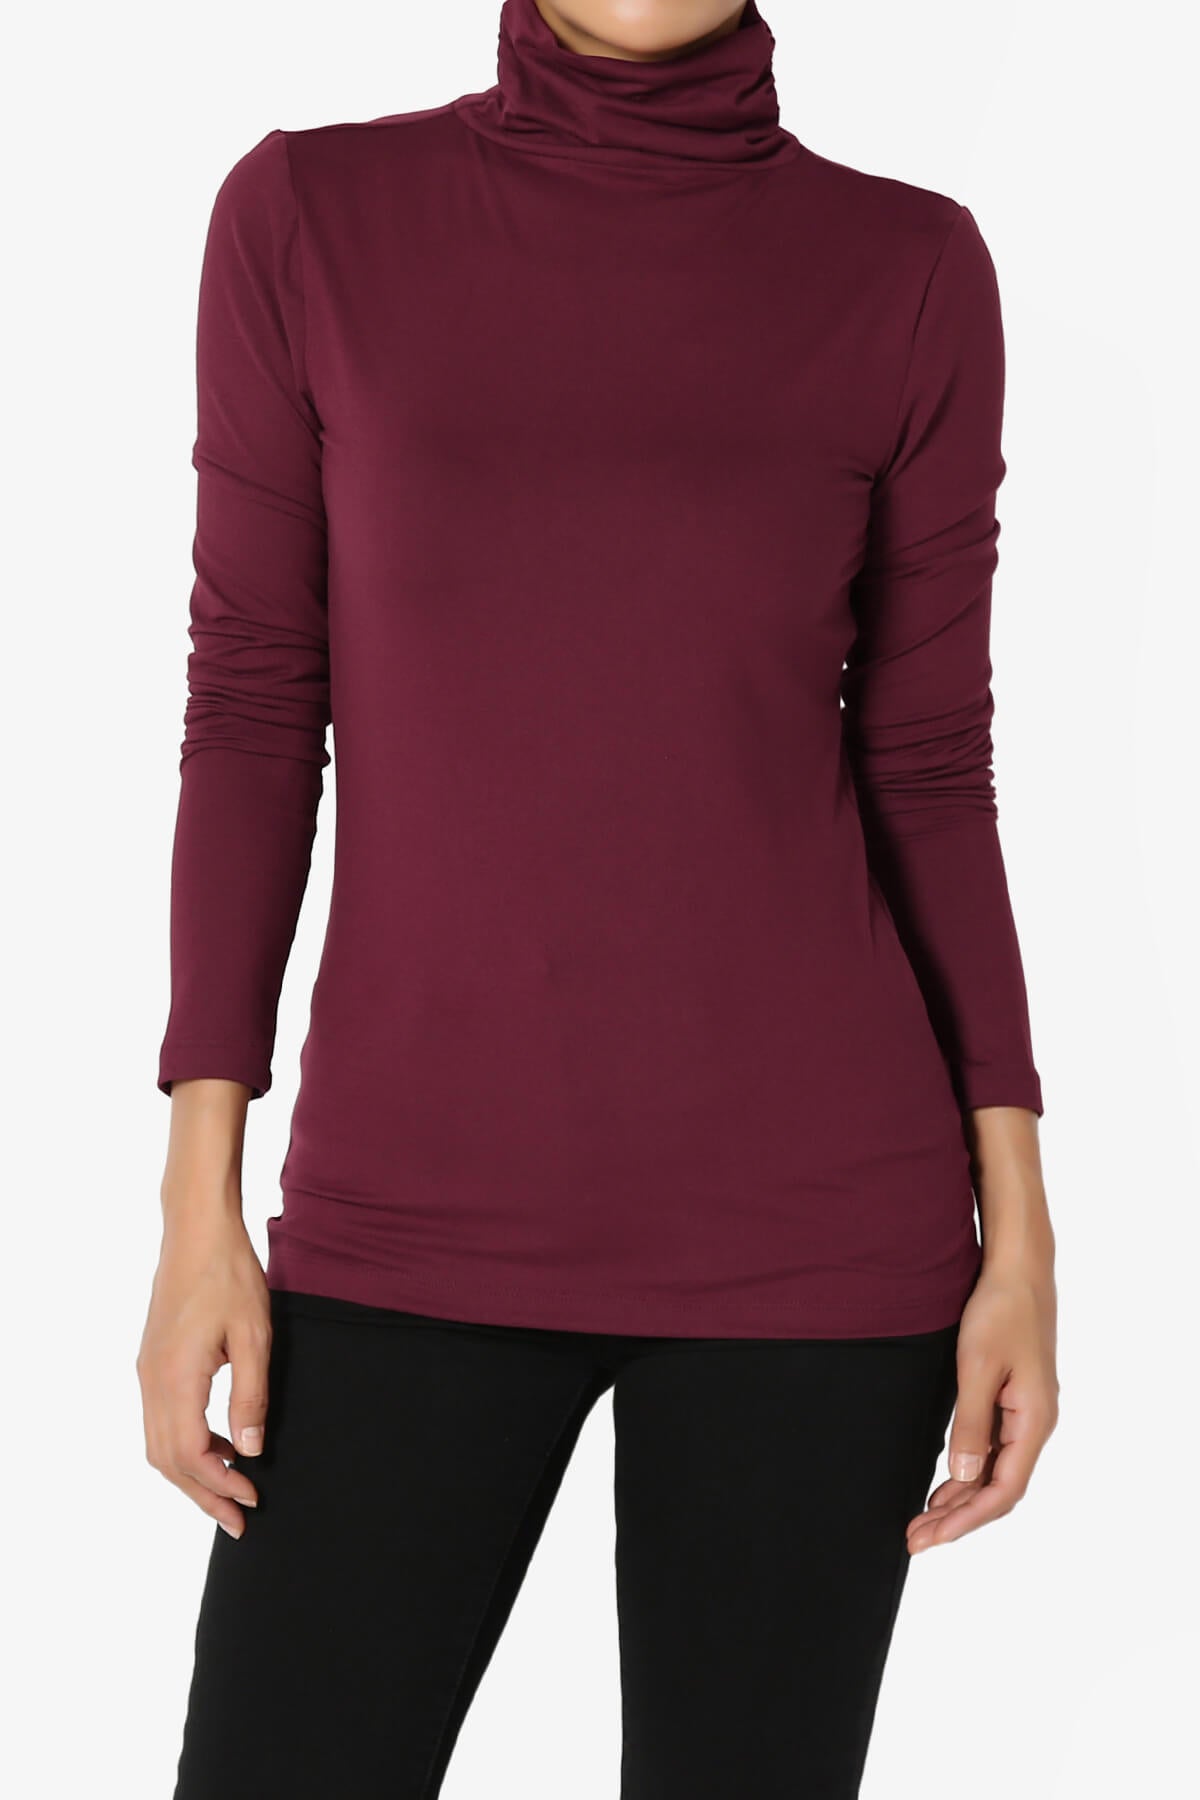 Load image into Gallery viewer, Viable Ruched Turtle Neck Long Sleeve Top DARK BURGUNDY_1
